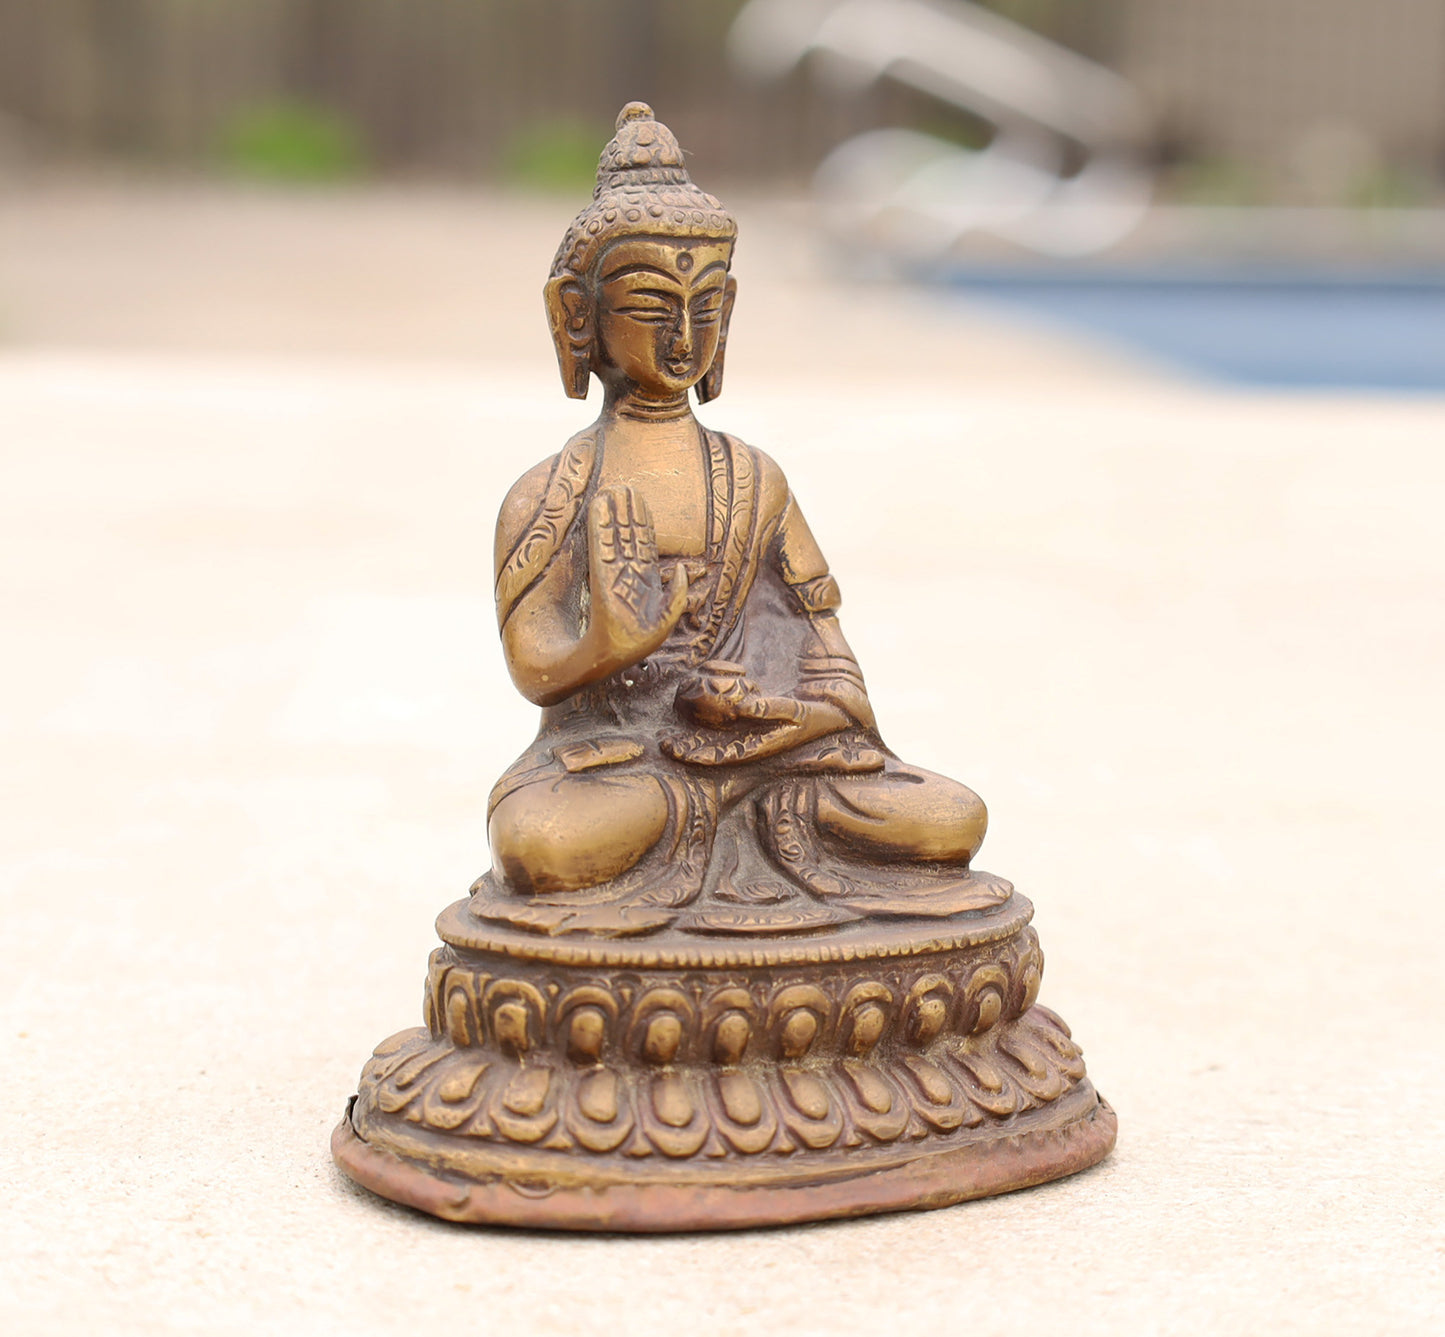 Blessing Buddha Statue Solid Brass for Home Altar Shrine Meditation Room 4 Inches Tall